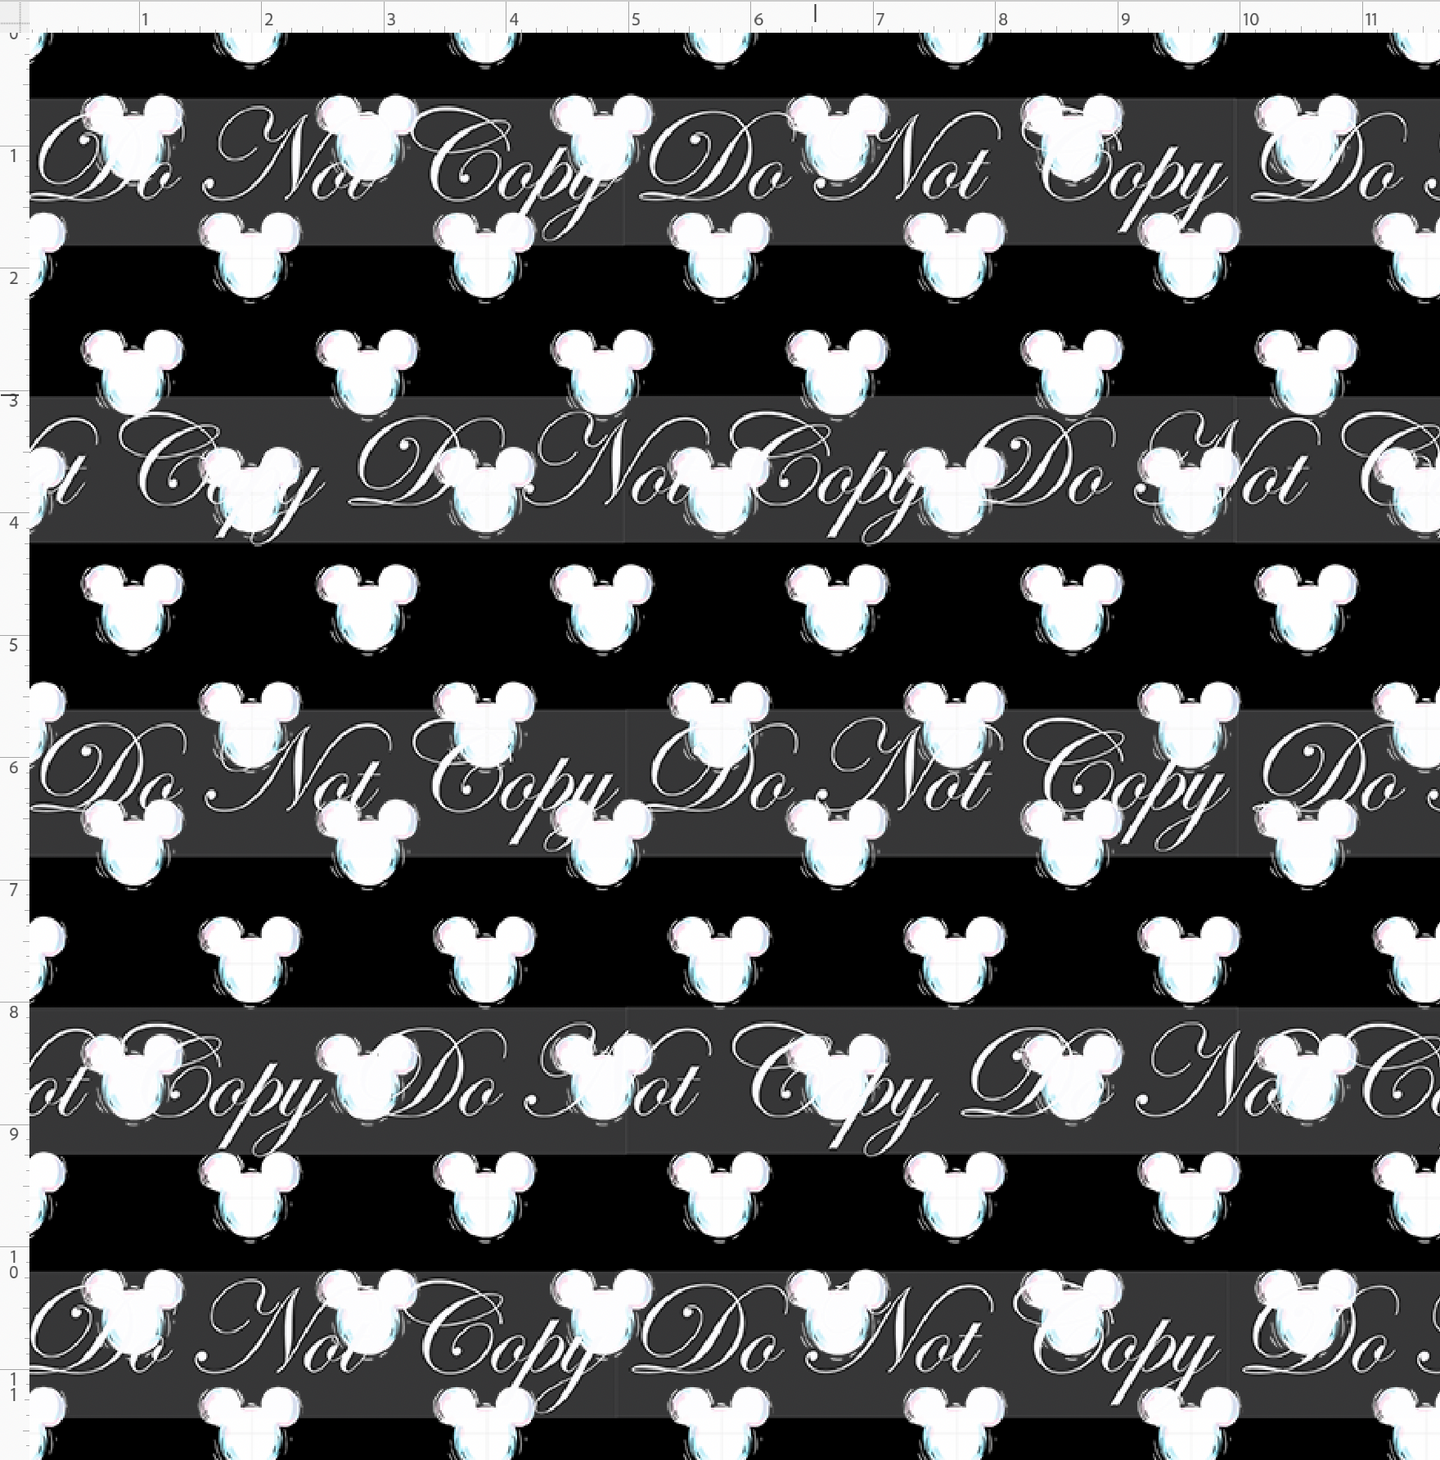 Retail - Mouse Heads - 1 inch - Black and White